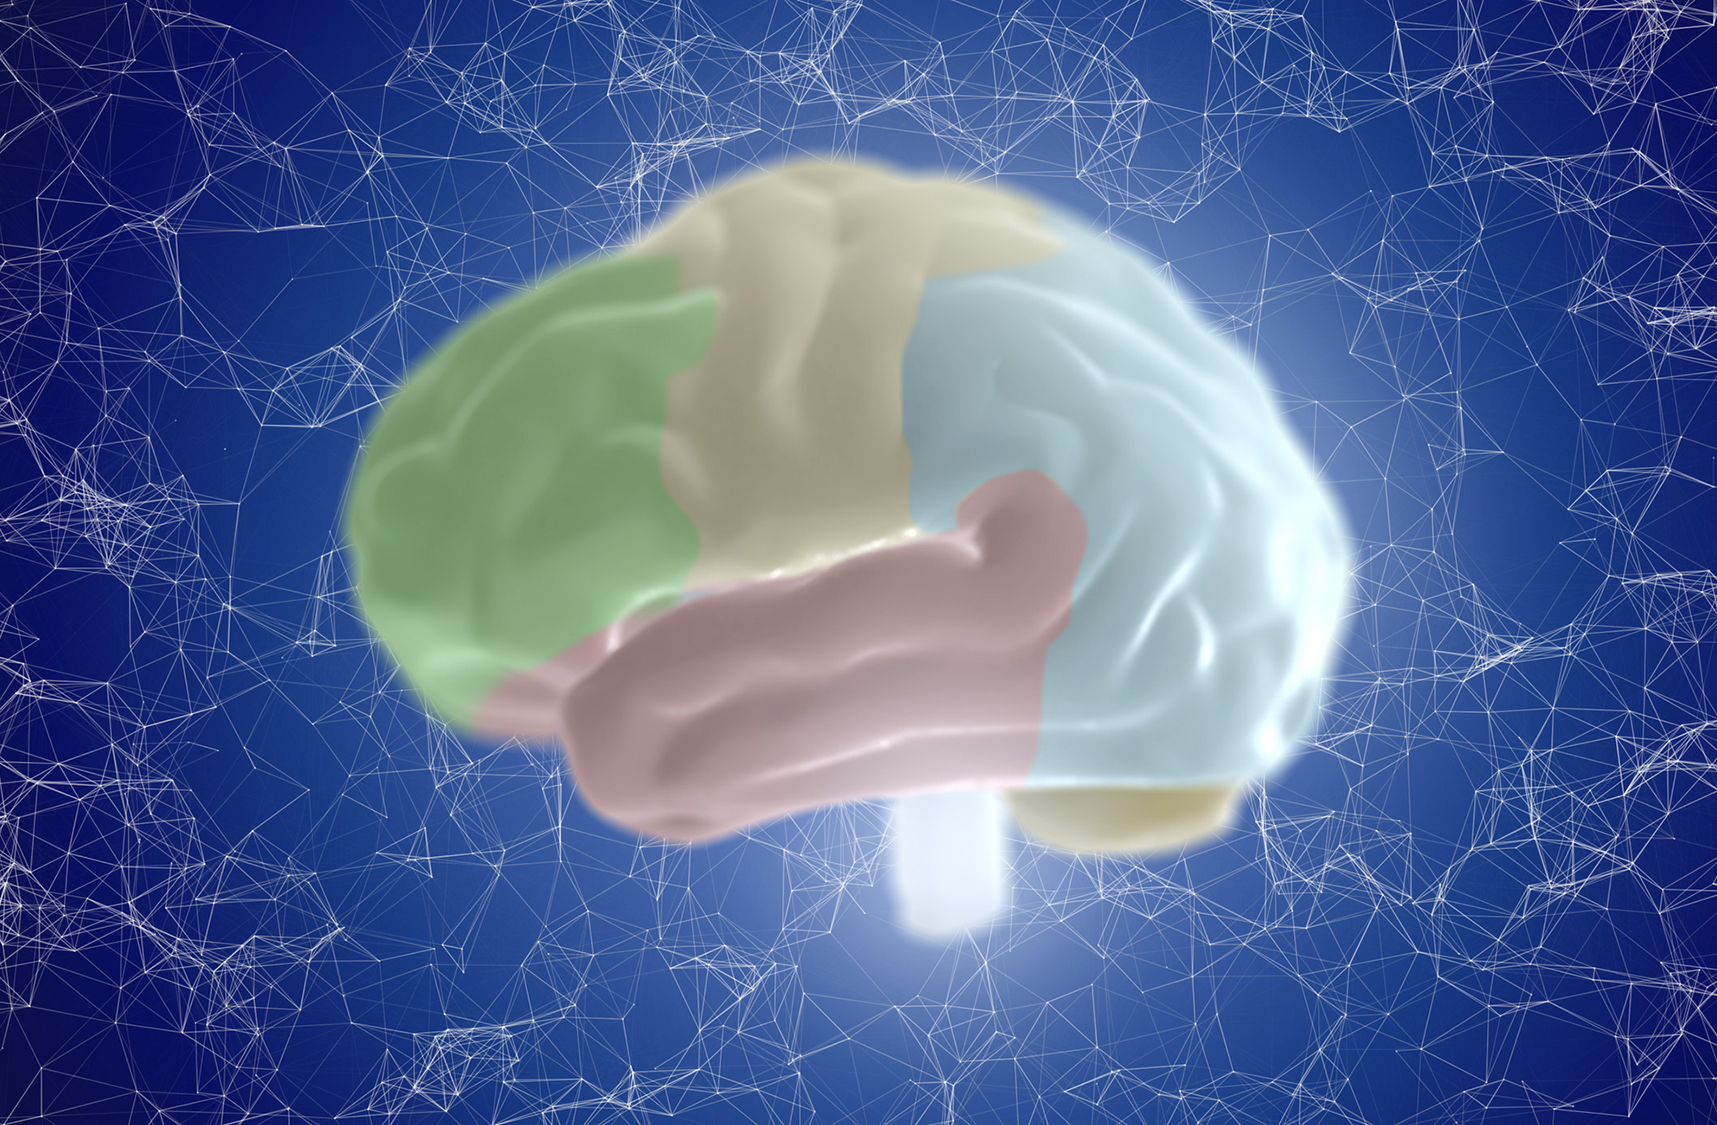 rendering of a brain and its different sections highlighted as different colors.